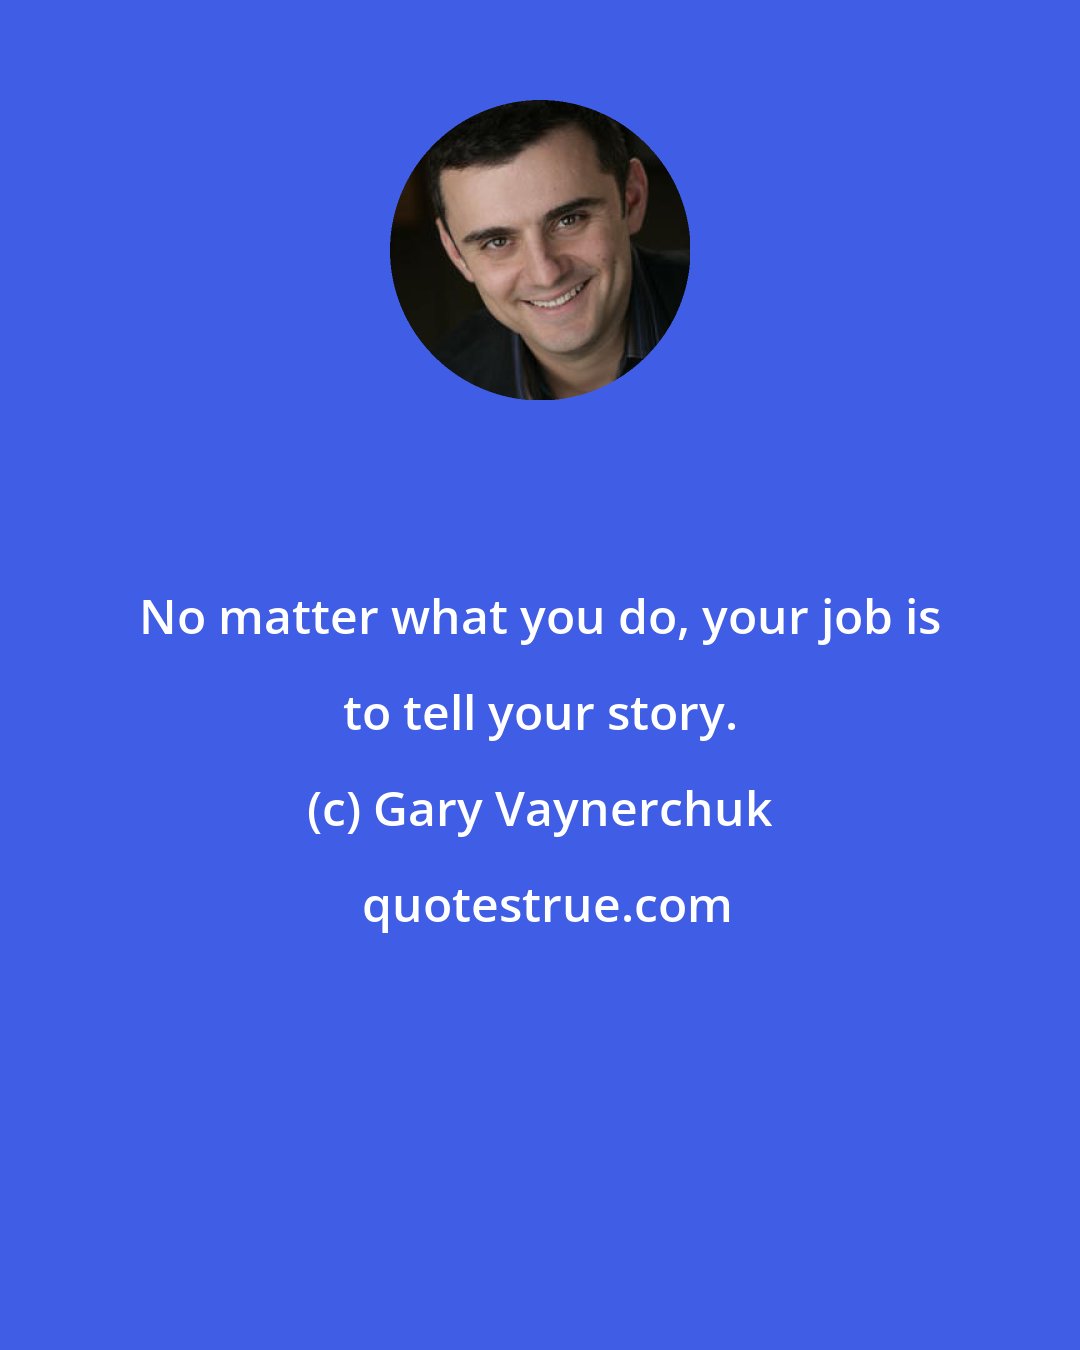 Gary Vaynerchuk: No matter what you do, your job is to tell your story.